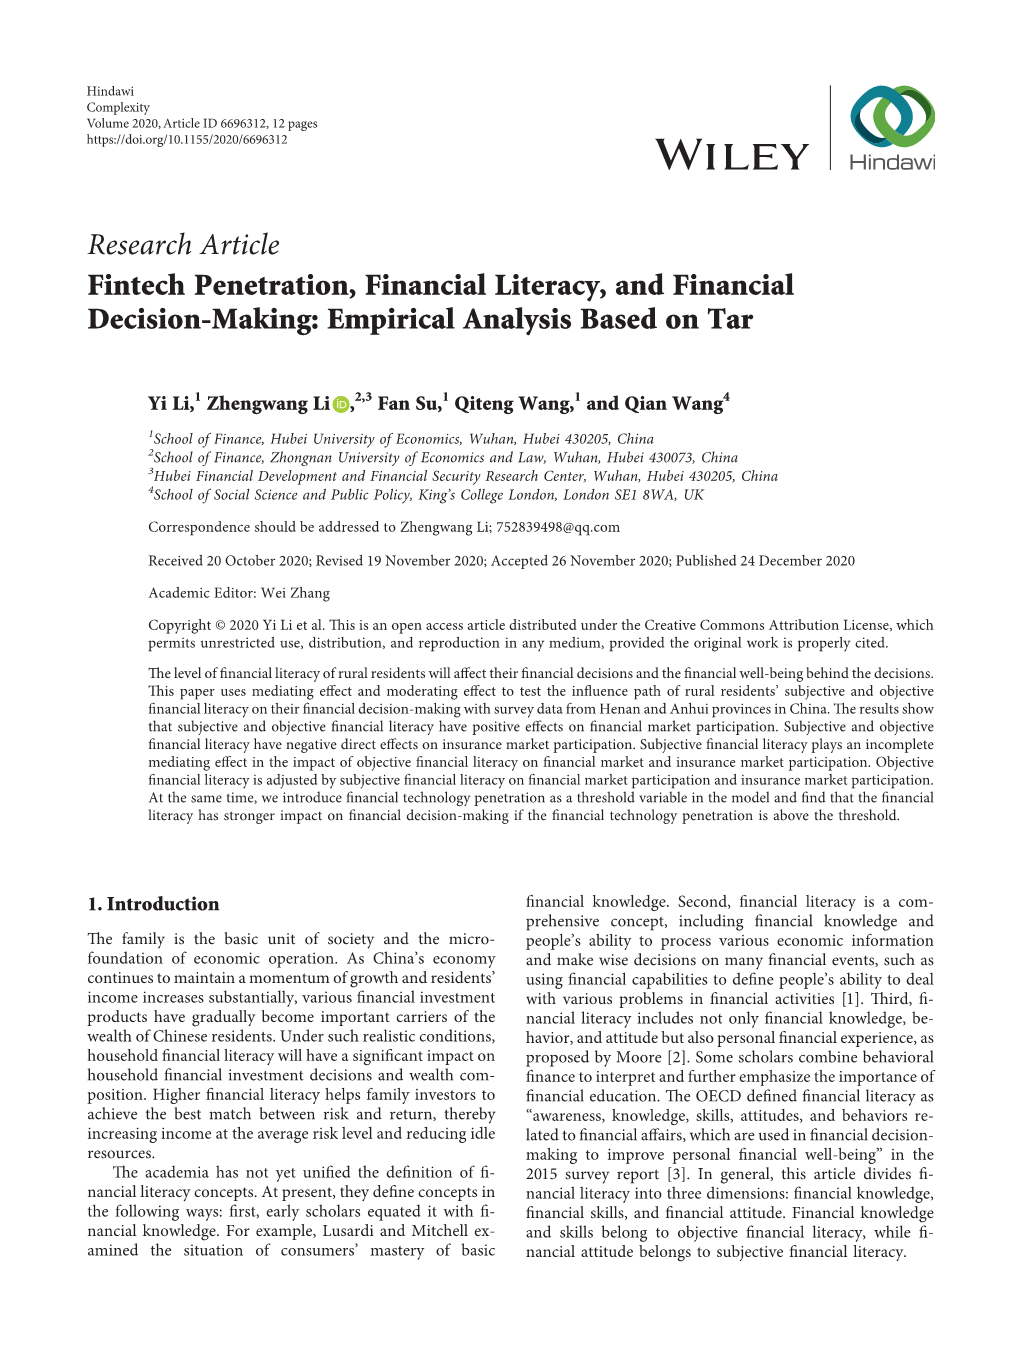 Fintech Penetration, Financial Literacy, and Financial Decision-Making: Empirical Analysis Based on Tar